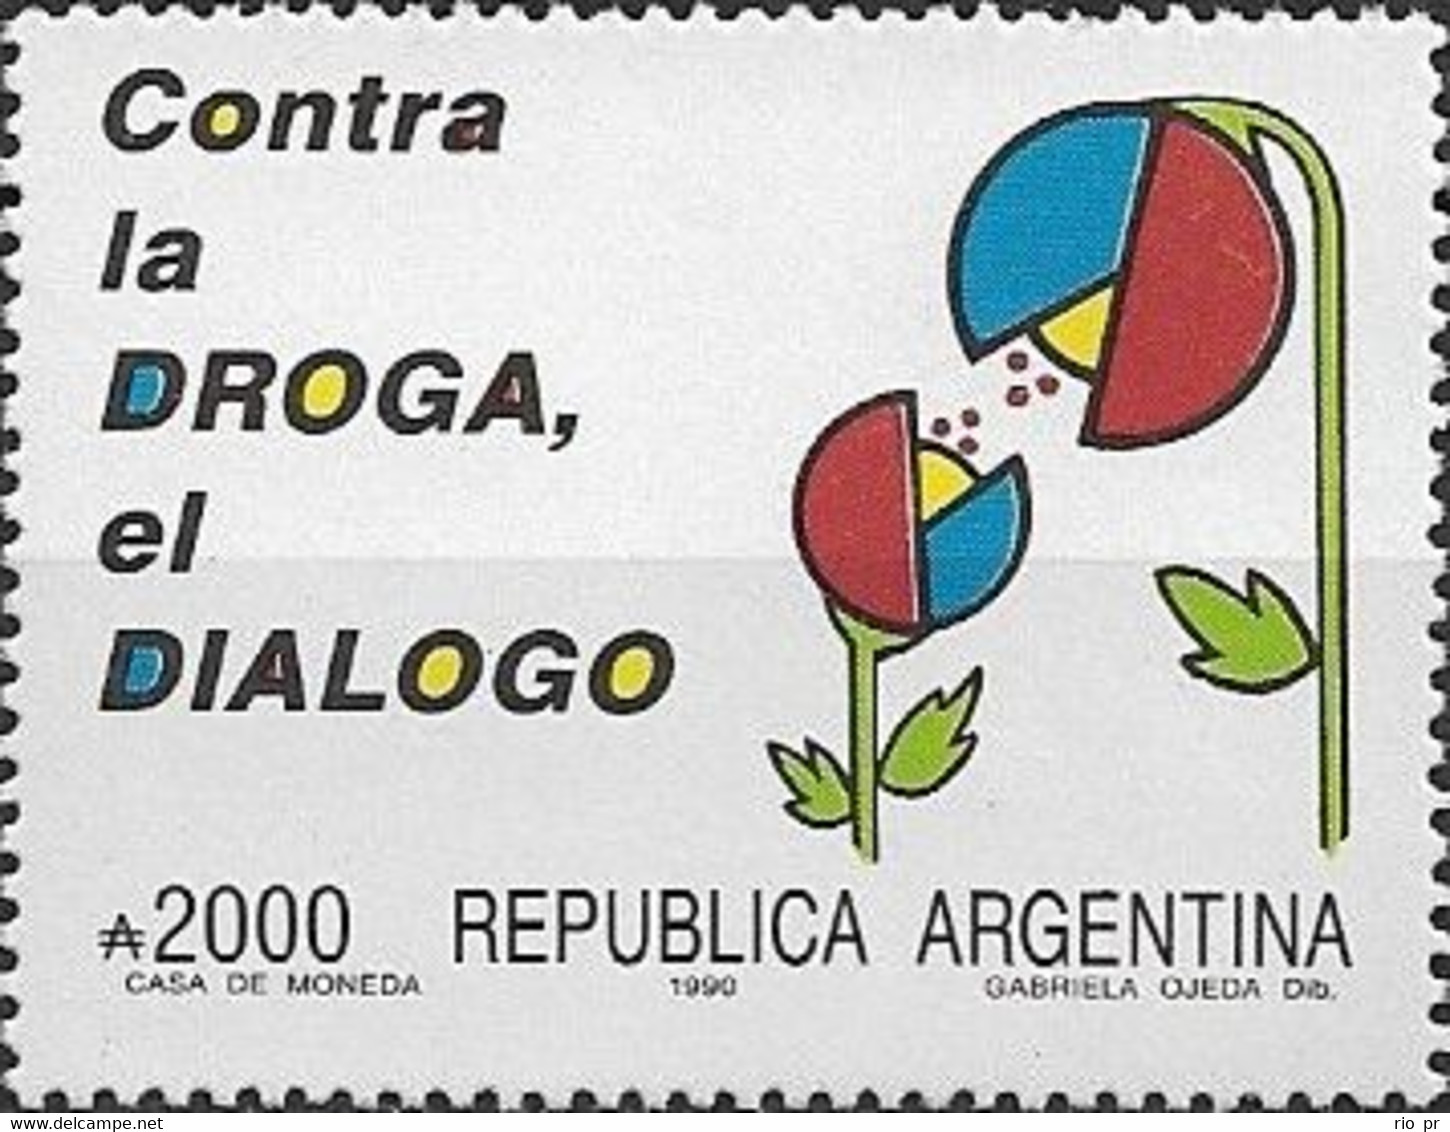 ARGENTINA - YOUTH AGAINST DRUGS 1990 - MNH - Droga